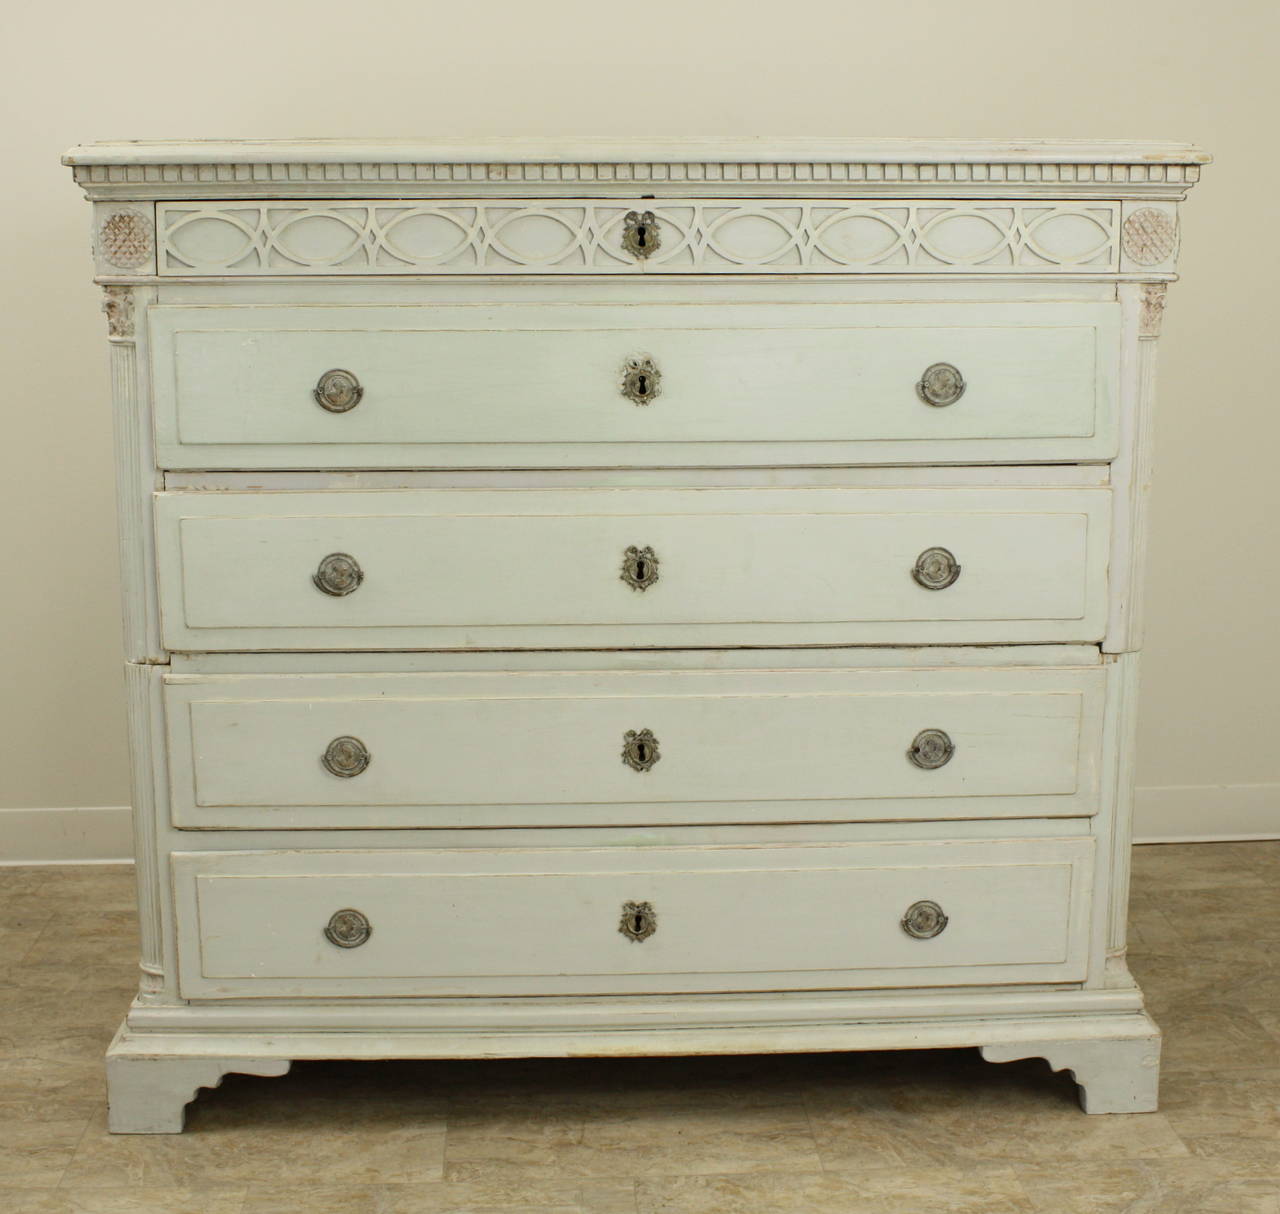 Excellent example of the Swedish commode, the best carved elements enhance this piece.  Beautiful fretwork and dental molding, carved rosettes at the top, lovely carved columns.  Shaped drawers add dimension. All hardware is original bronze. The